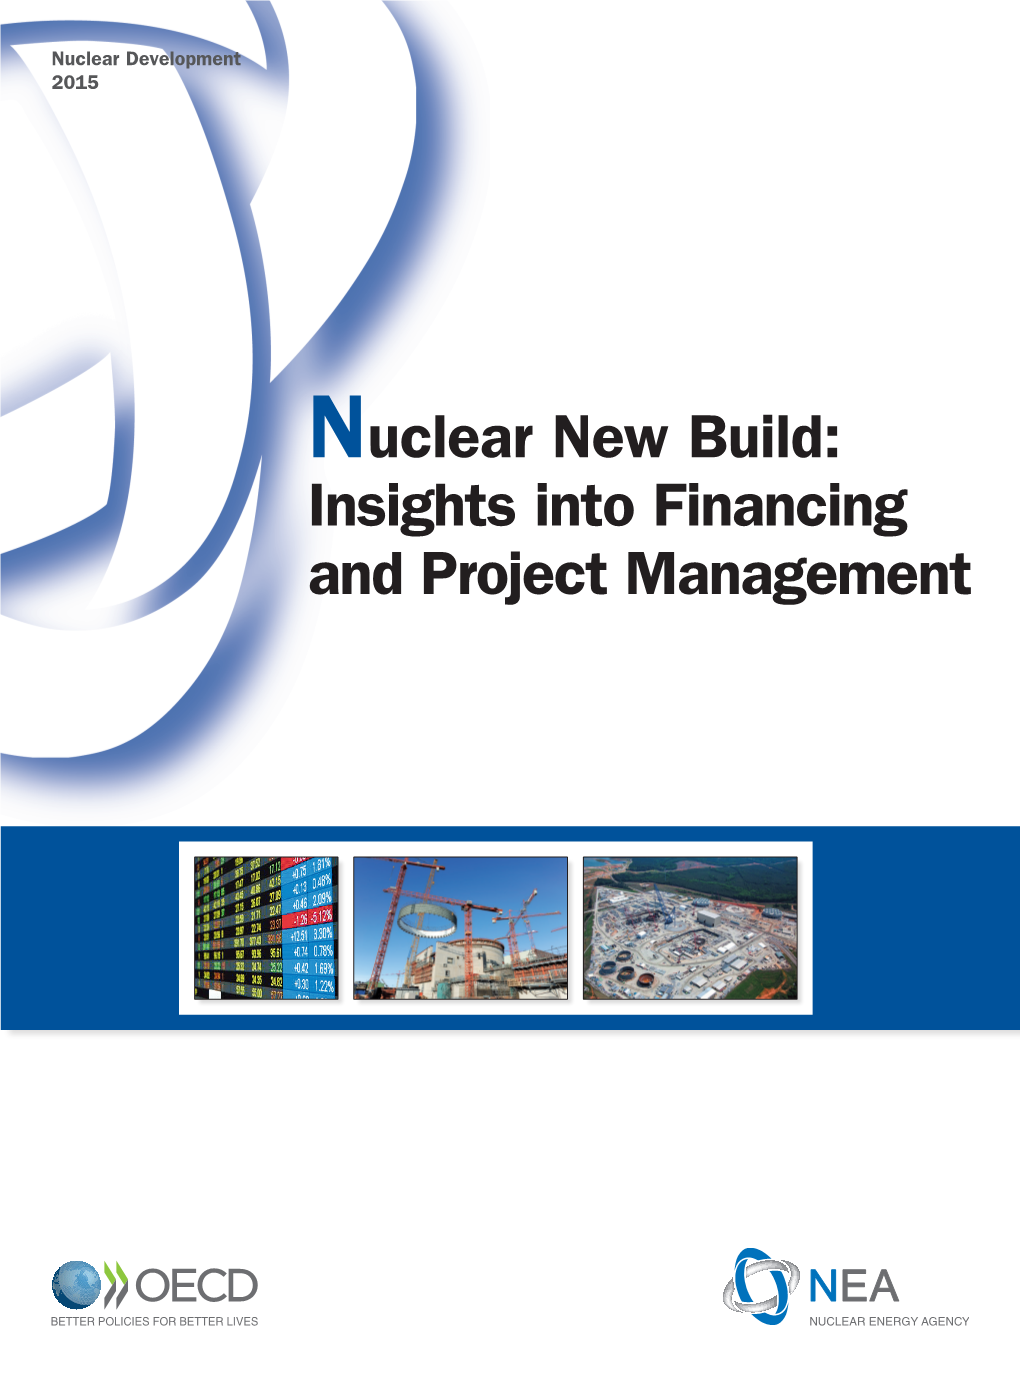 Nuclear New Build: Insights Into Financing and Project Management